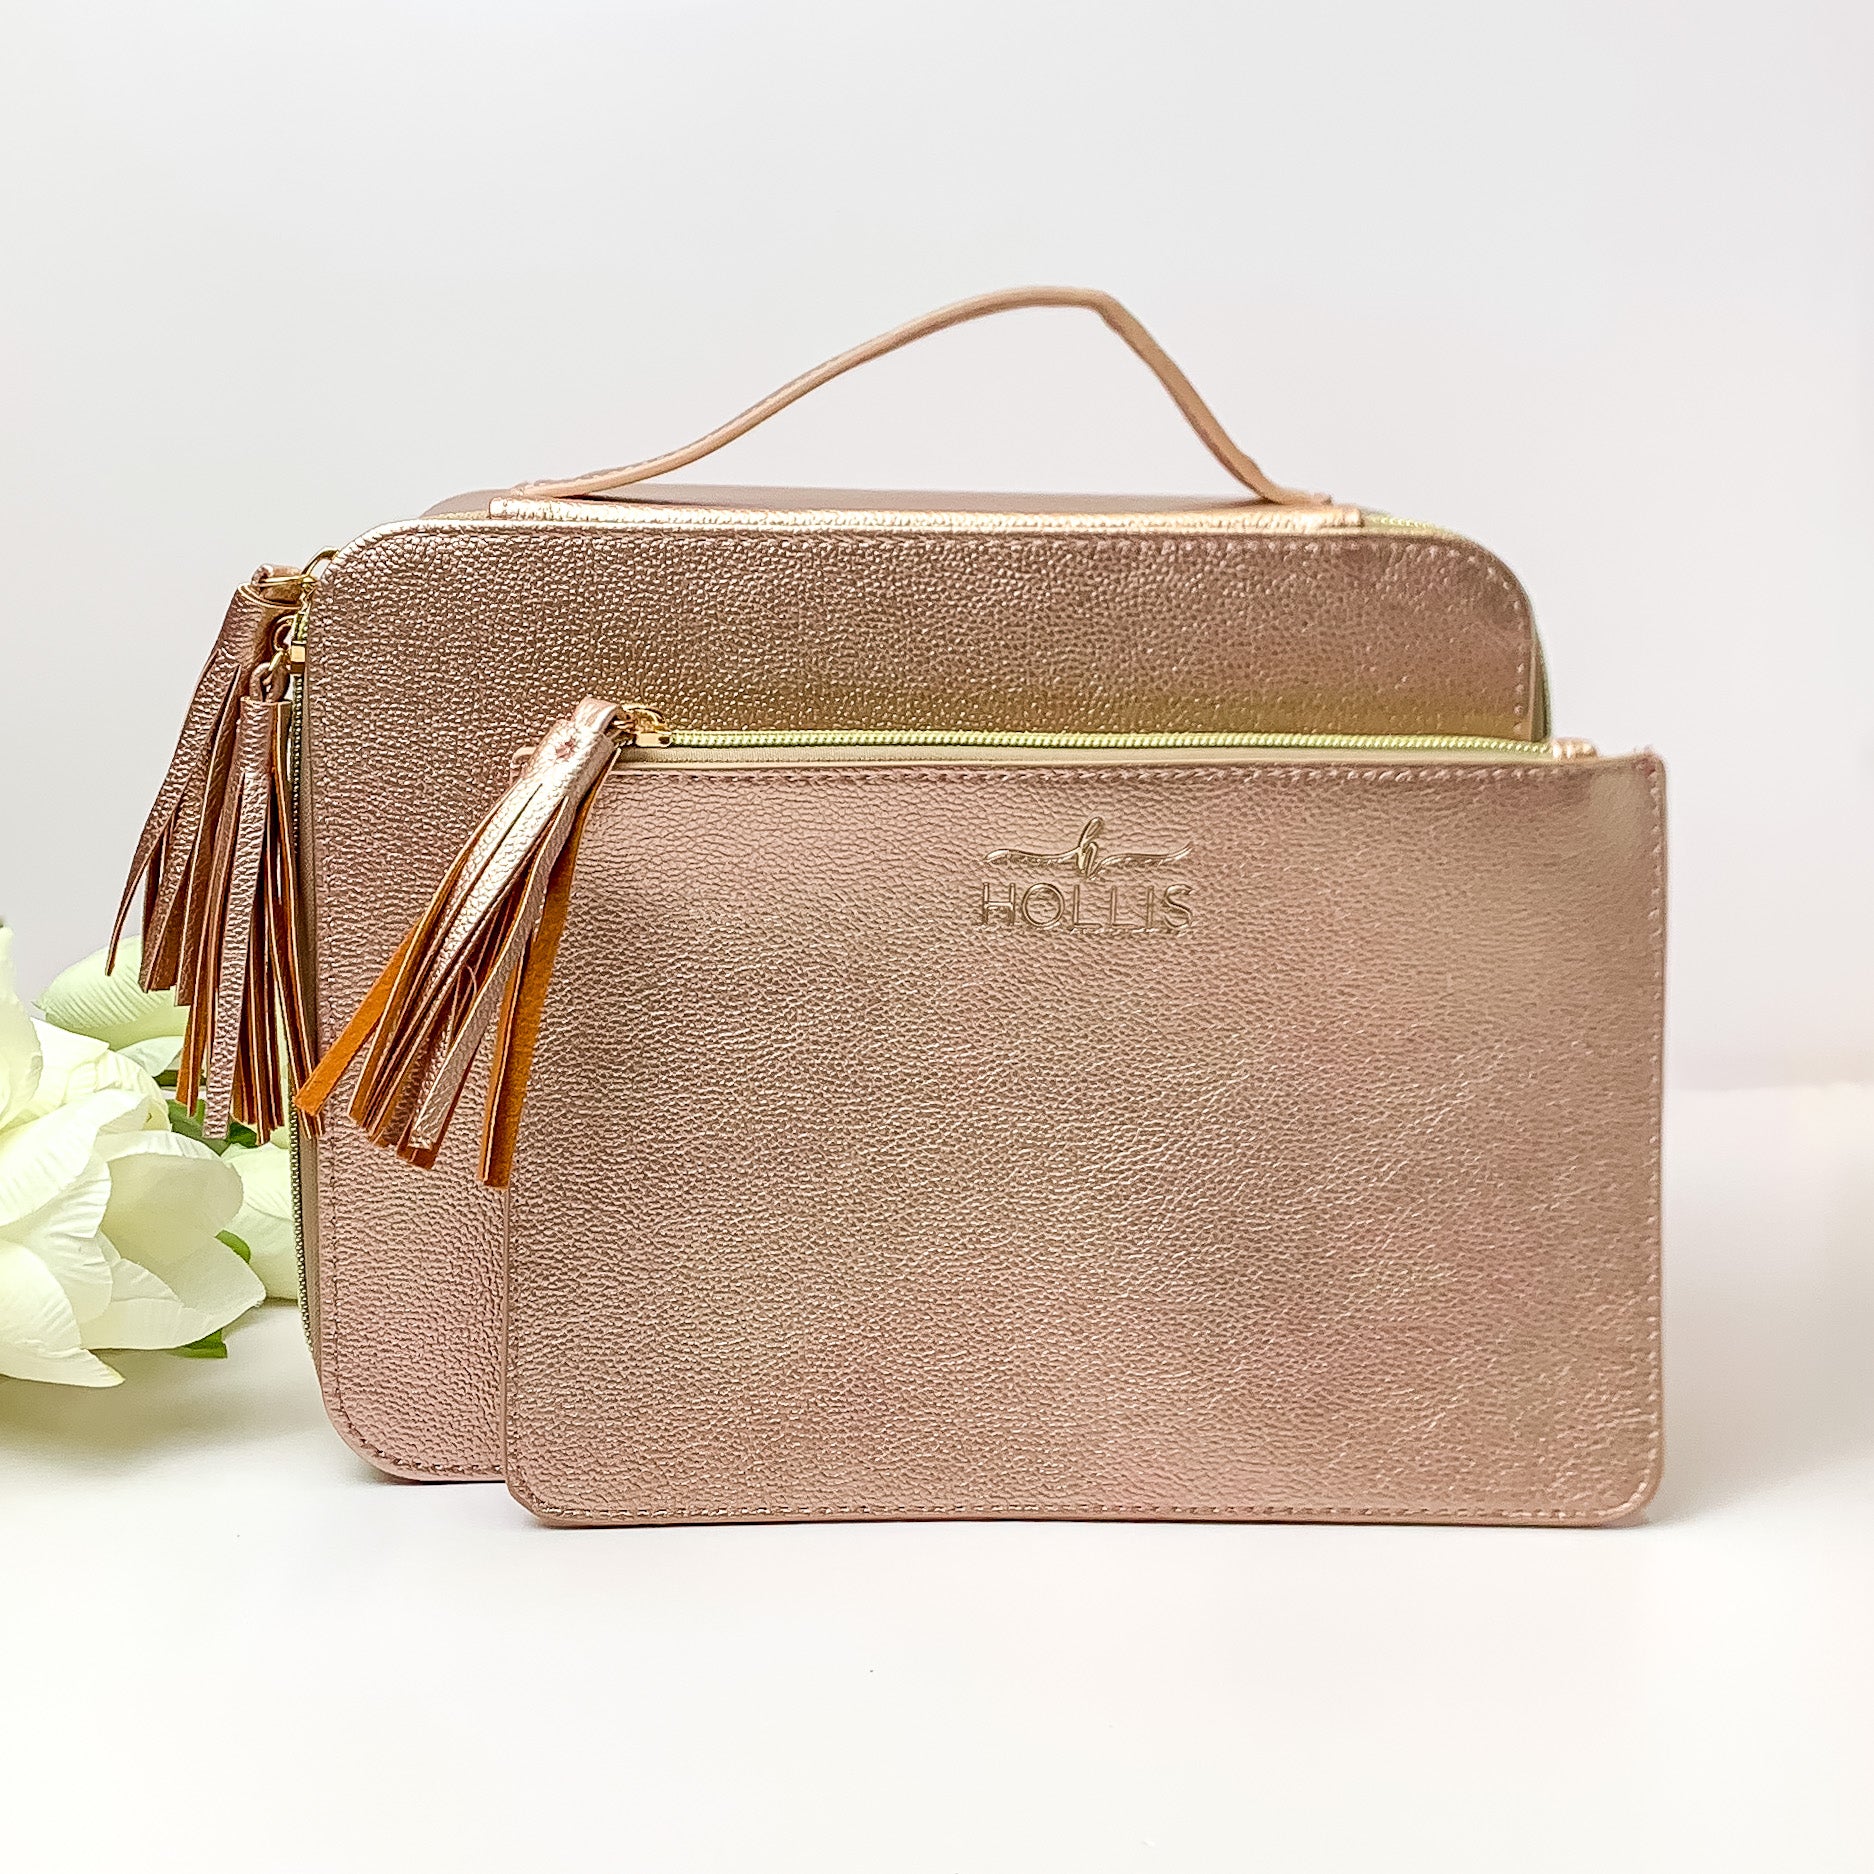 Hollis | Jett Setter in Rose Gold - Giddy Up Glamour Boutique